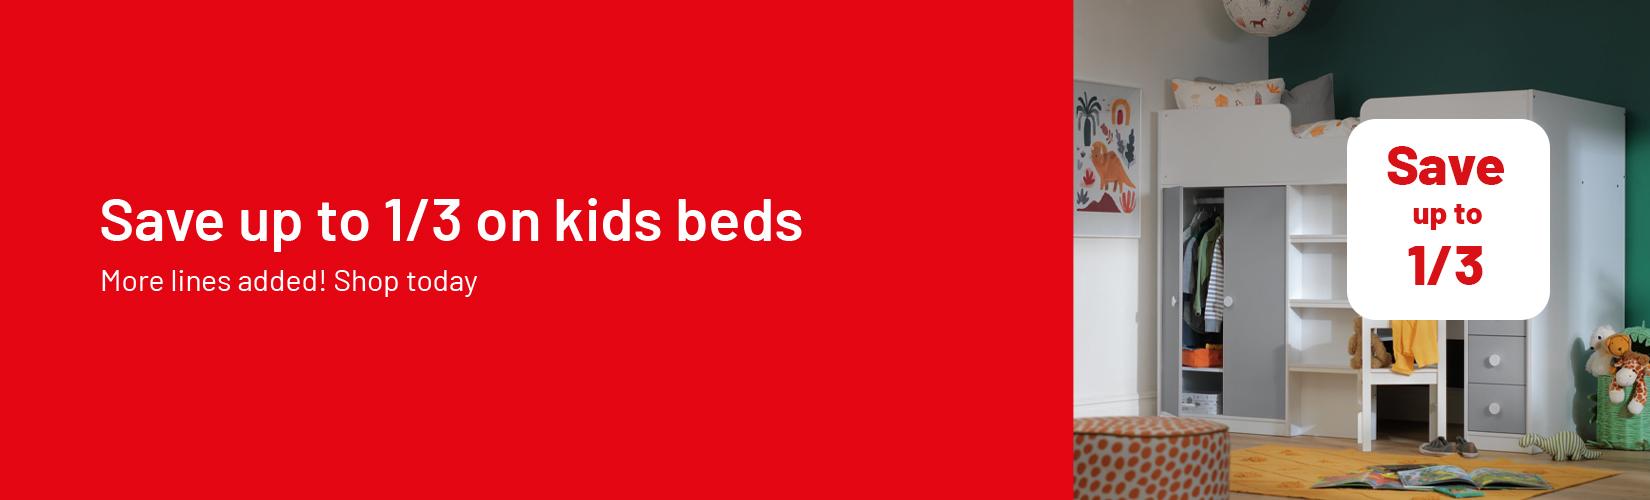 Save up to 1/3 on kids beds. More lines added! Shop today.